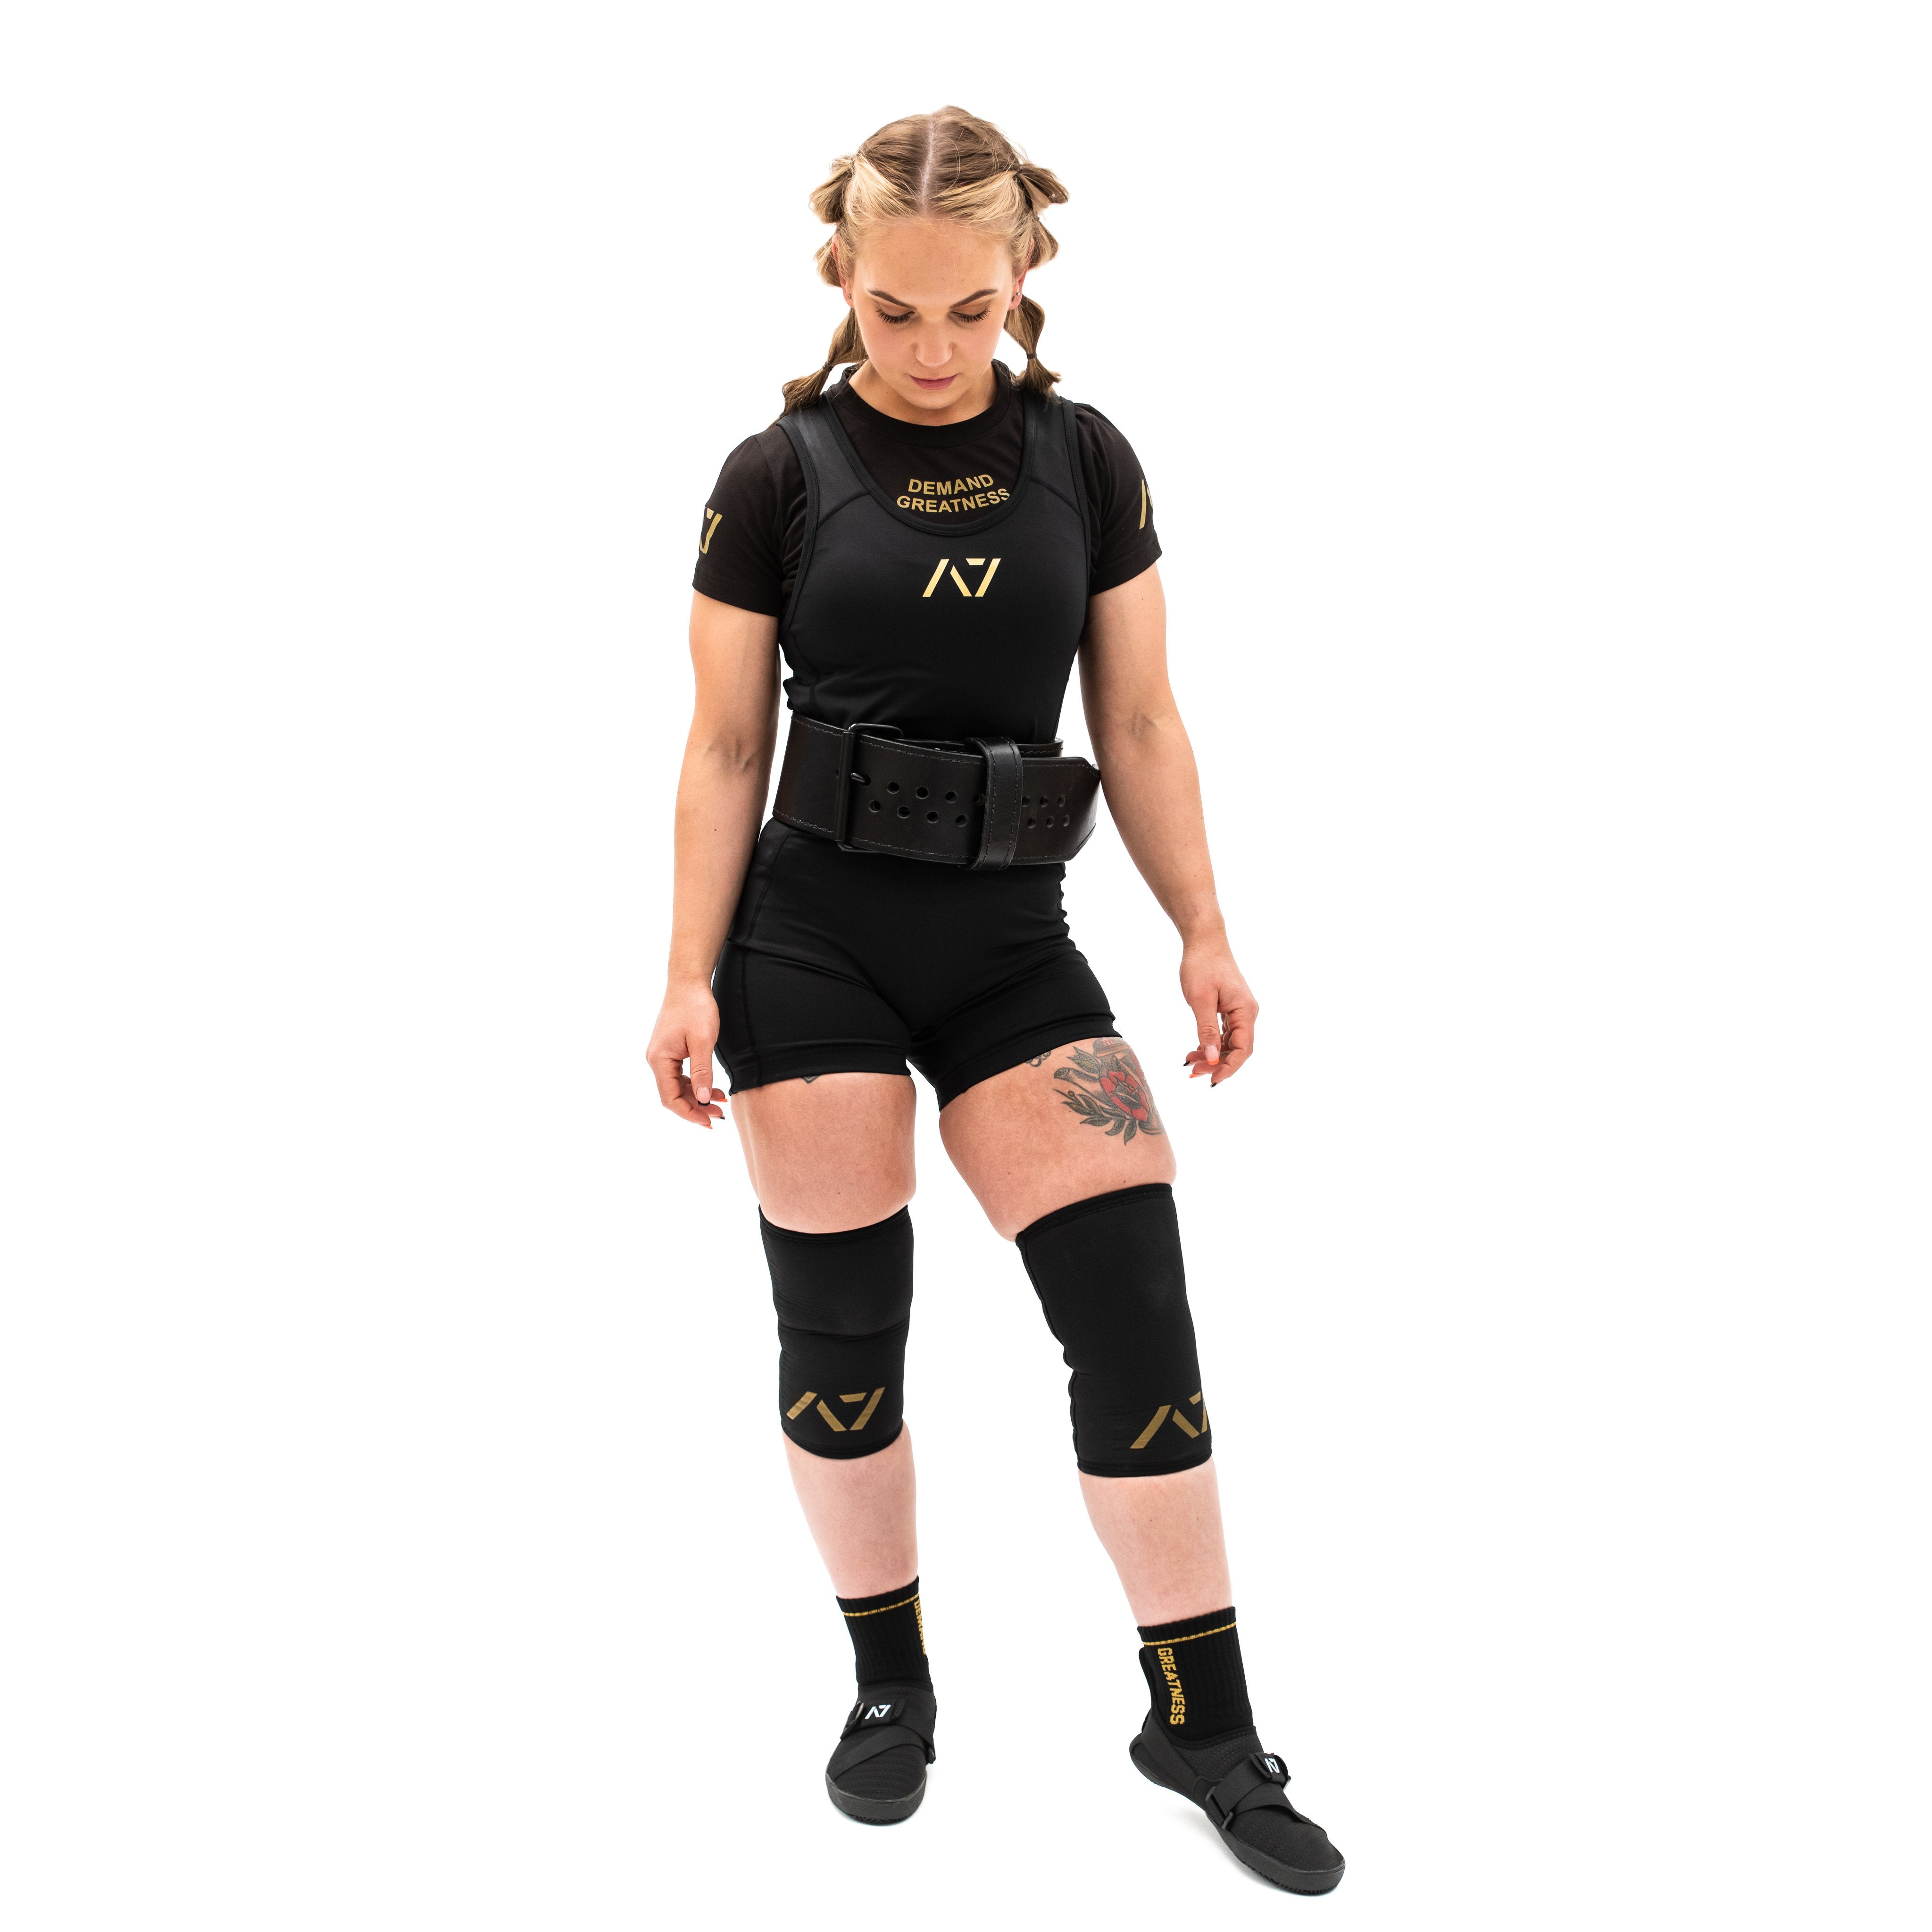 A7 Gold Standard Stiff Sleeves knee sleeves are structured with a downward cut panel on the back of the quad and calf to ensure these have the ultimate compression at the knee joint. The A7 CONE Gold Standard Stiff Knee Sleeves are IPF approved and are allowed in all IPF competitions and affiliate federations like the European Powerlifting Federation and all federations across Europe.